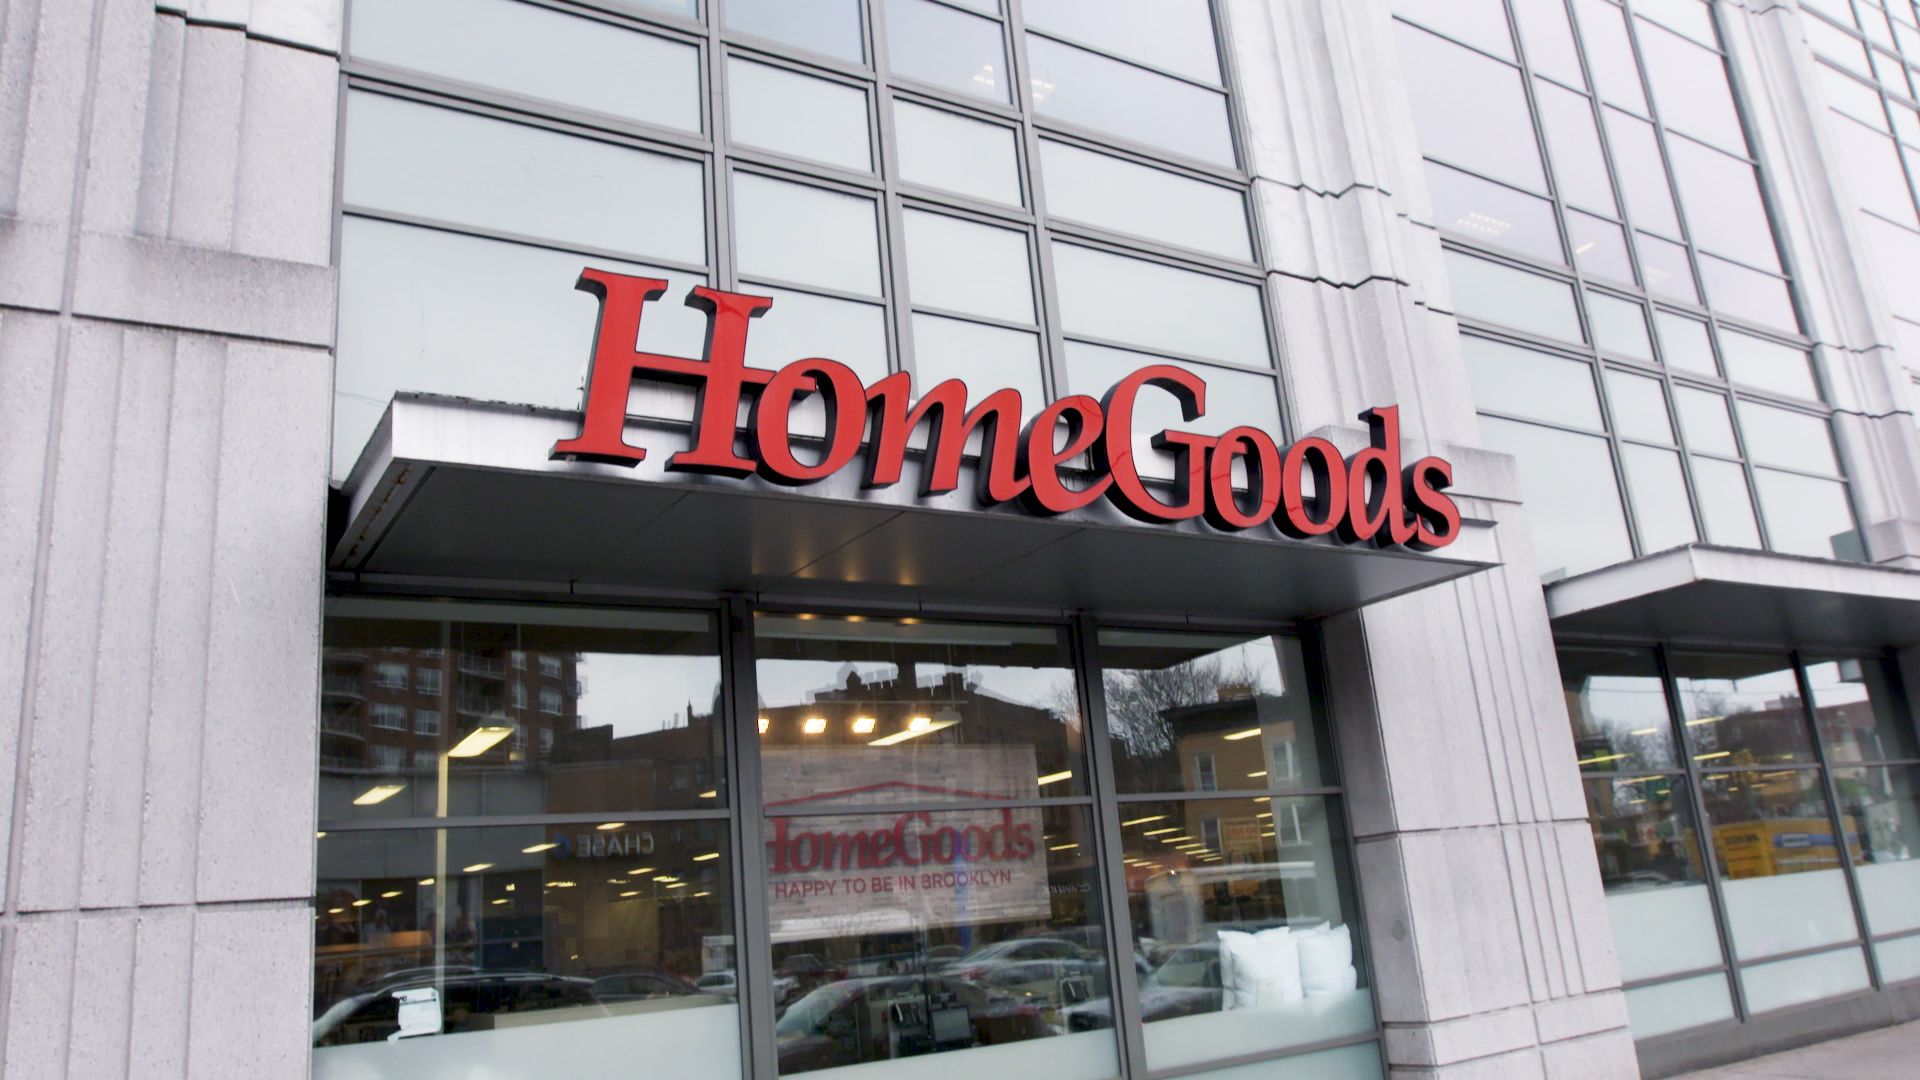 HomeGoods Online Shopping and Ordering Details - Can You Shop Online at  HomeGoods